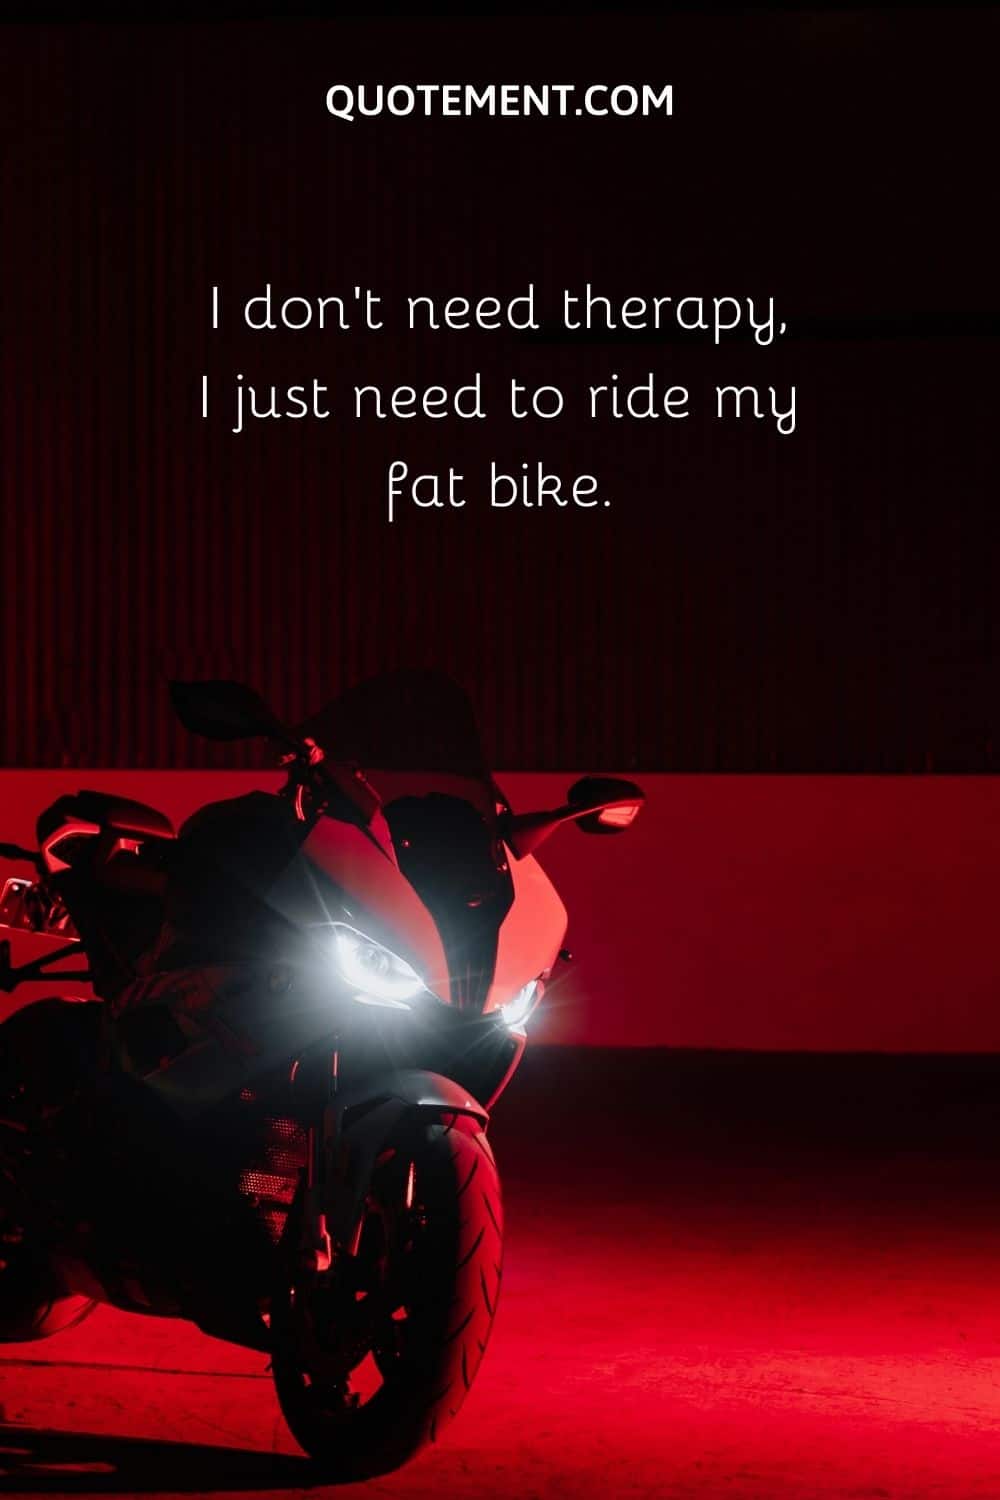 I don’t need therapy, I just need to ride my fat bike.